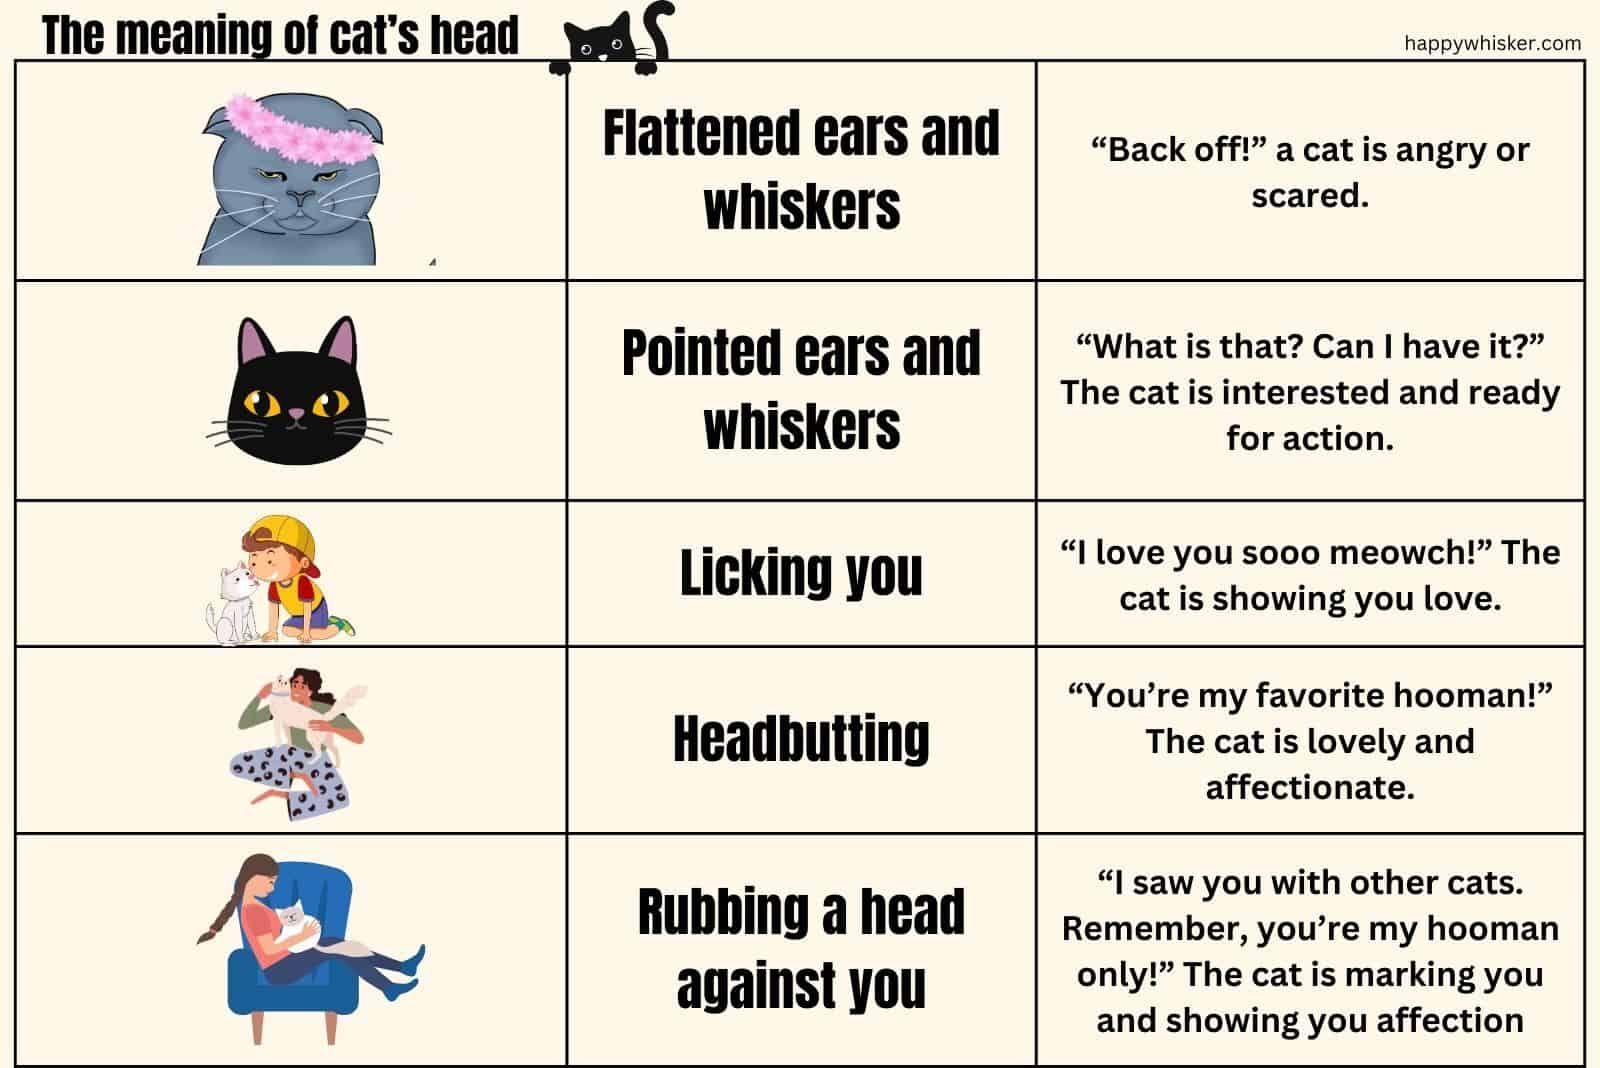 The meaning of cat’s head